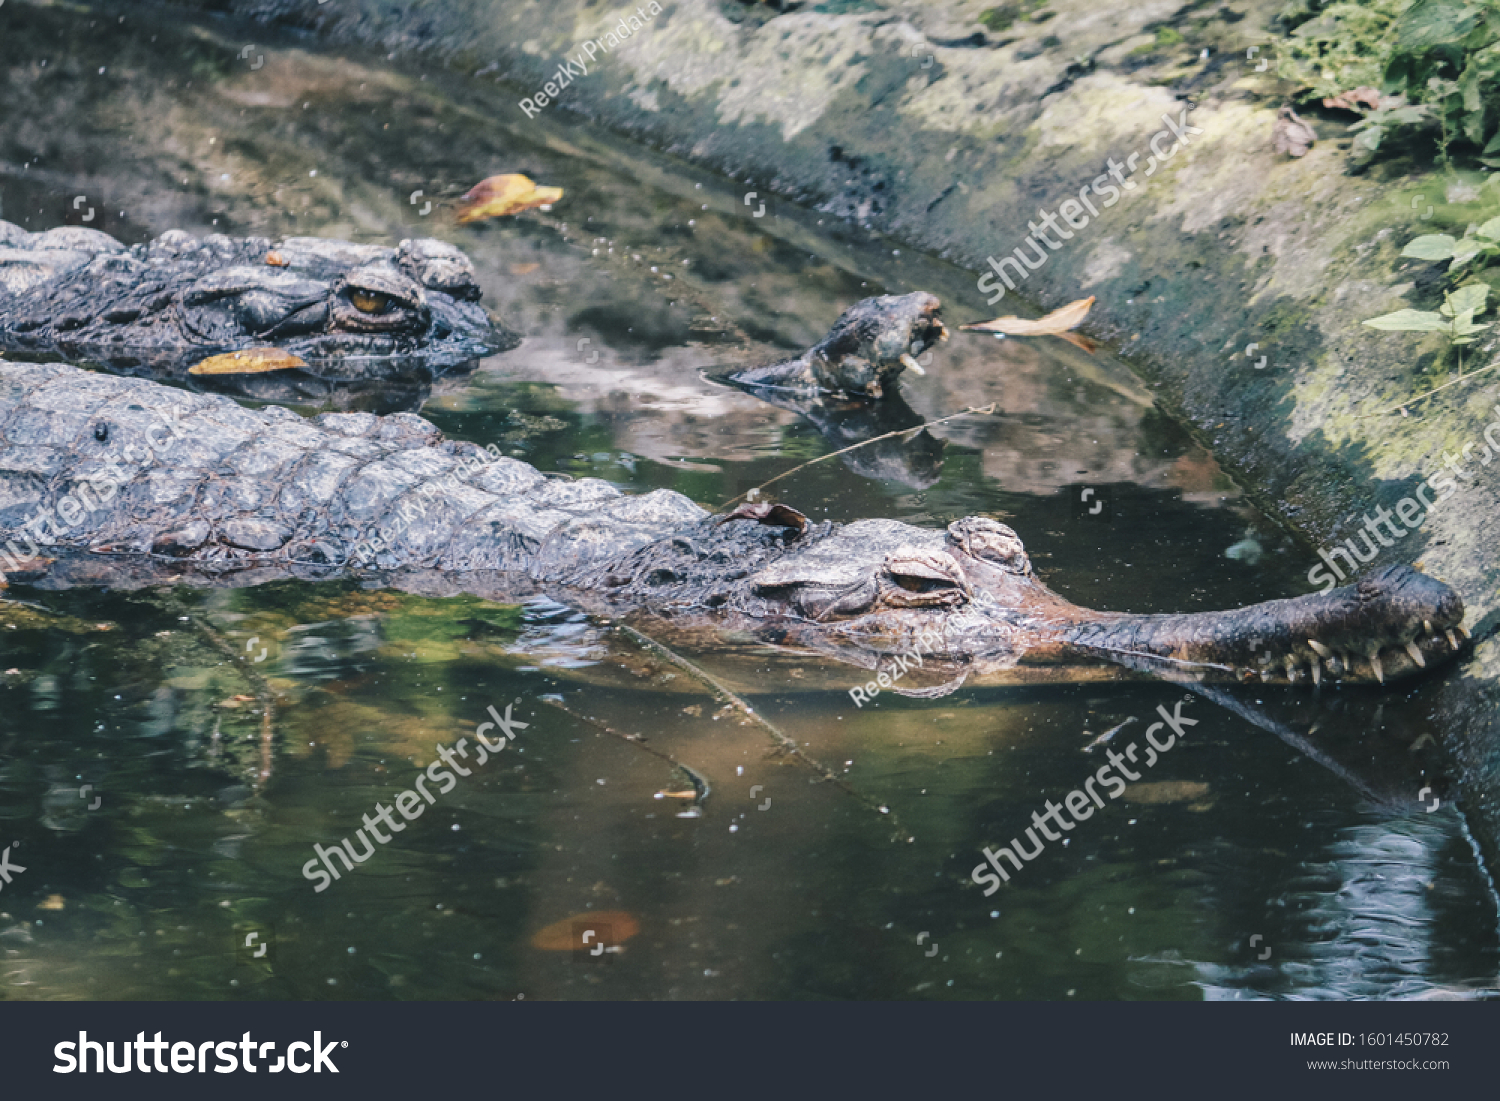 A matured male Gharial (Gavialis gangeticus), a fish-eating crocodile is resting in shallow water.  #1601450782